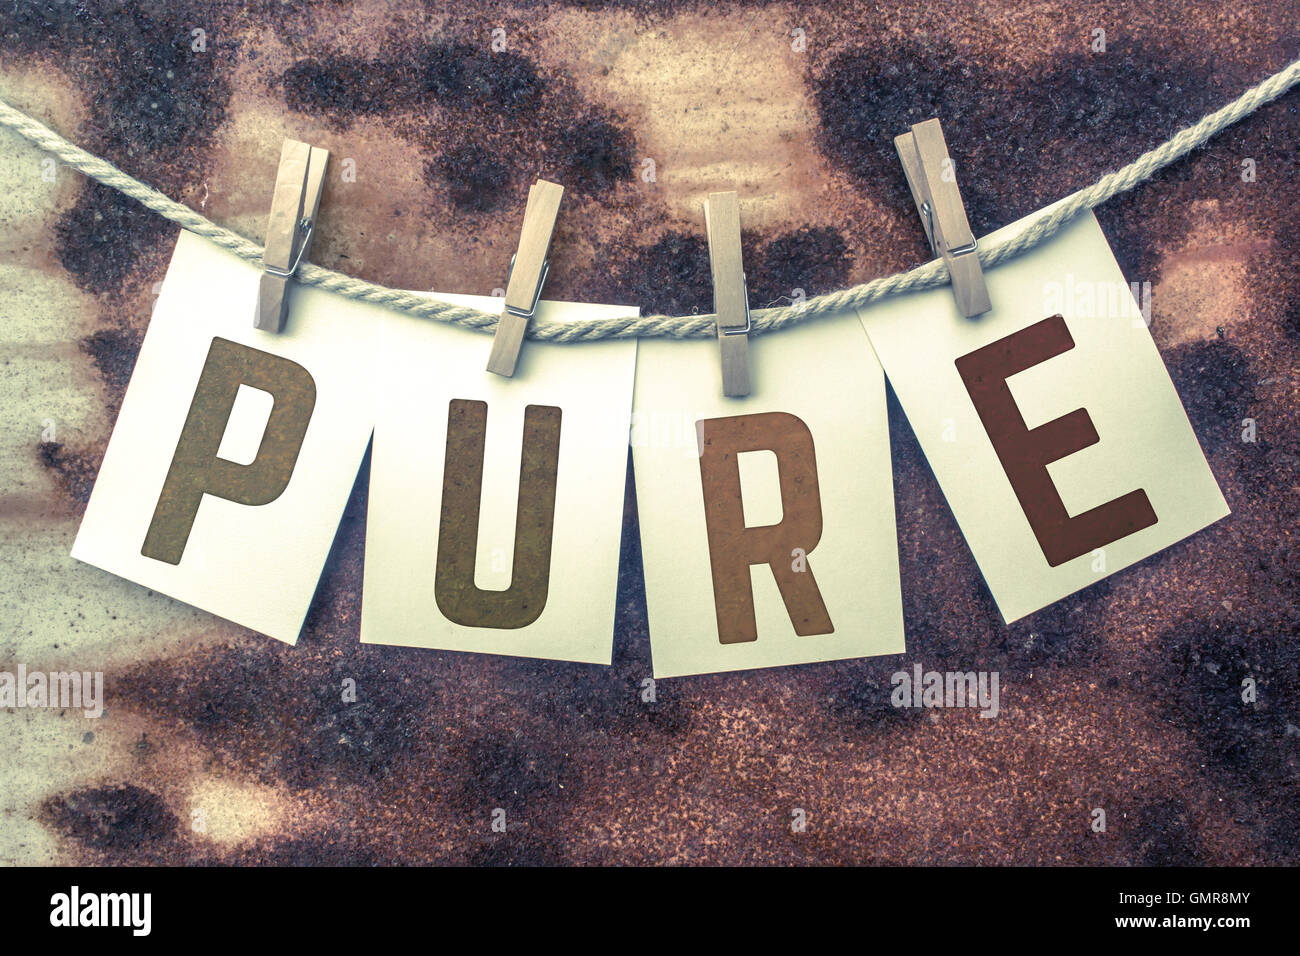 The word 'PURE' stamped on cards and pinned to an old piece of twine over a rusted metal background. Stock Photo